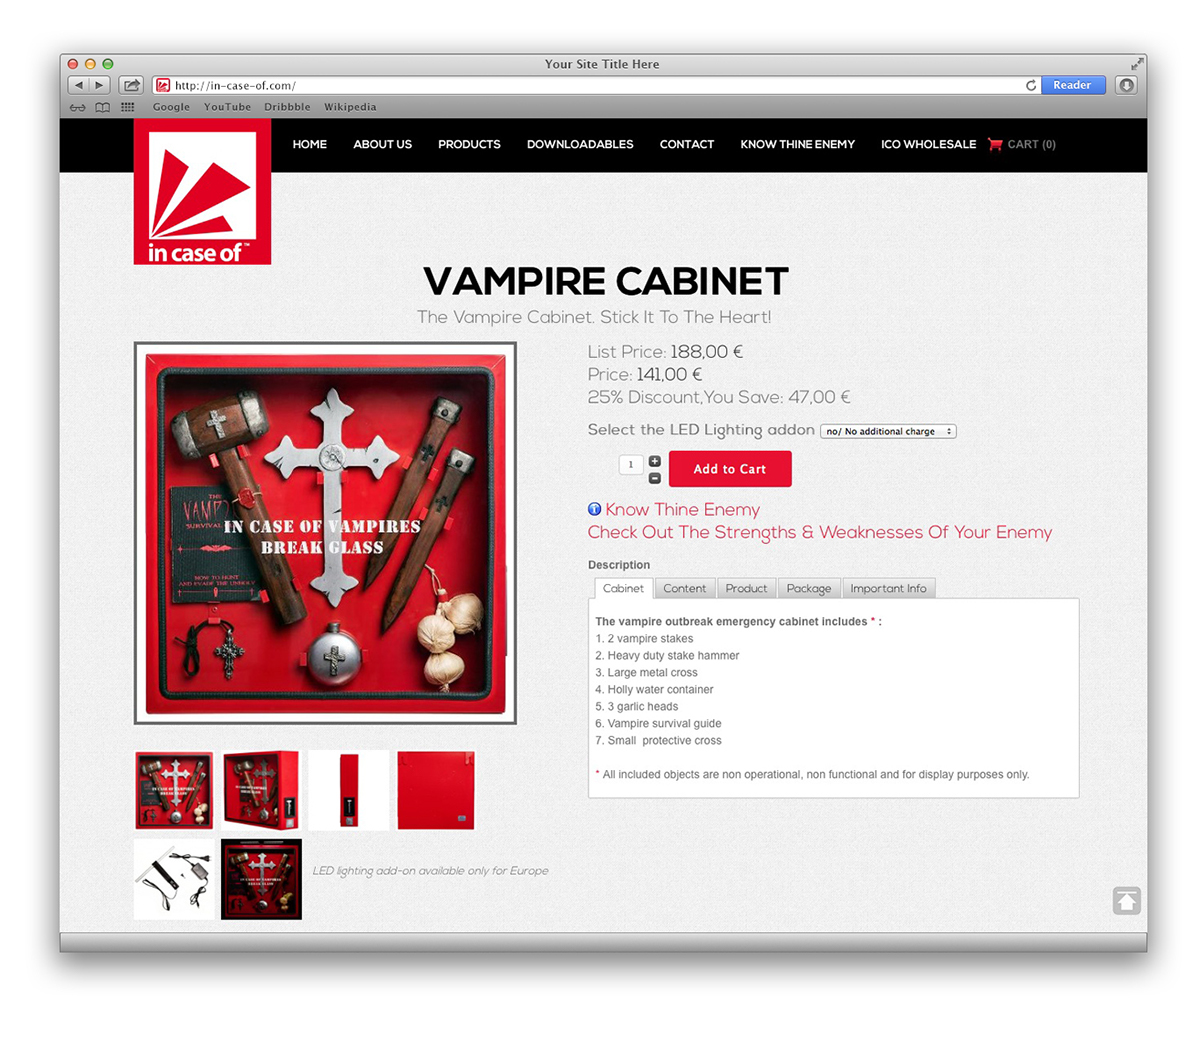 cabinet zombies vampyres EXORCISM in case of werewolfs